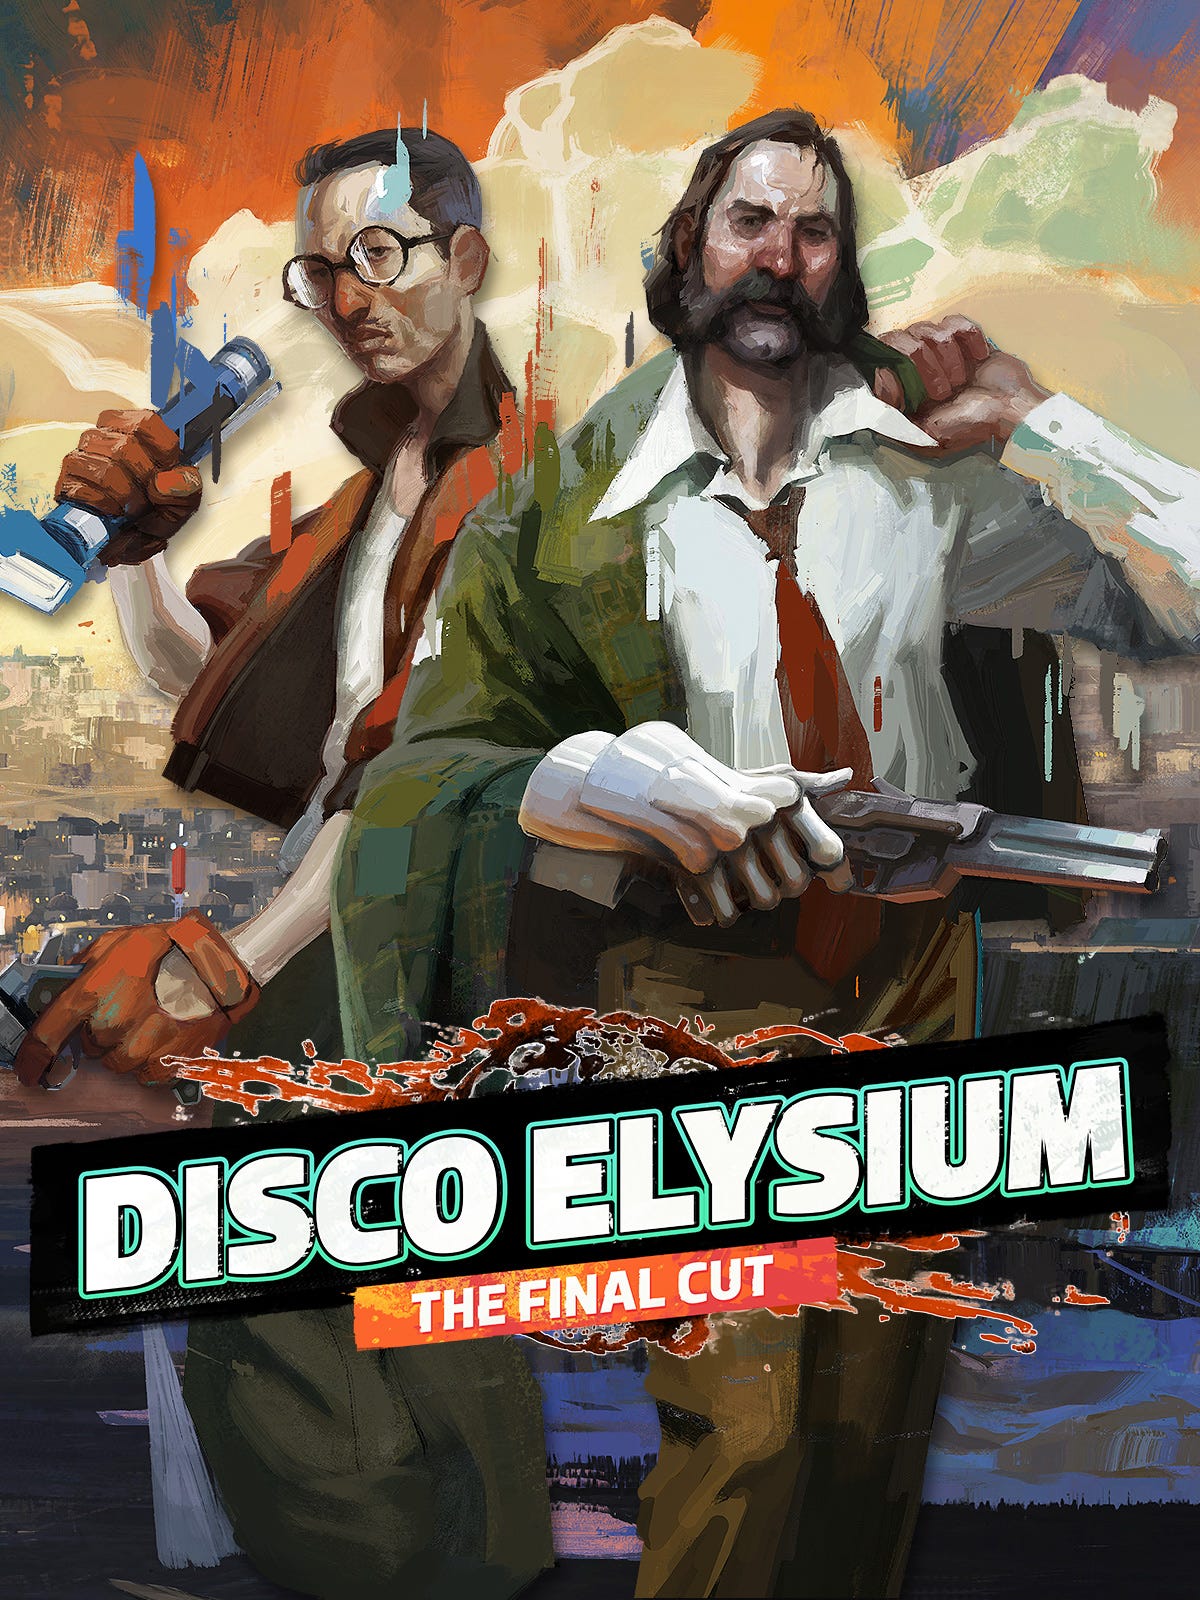 Disco Elysium | Download and Buy Today - Epic Games Store